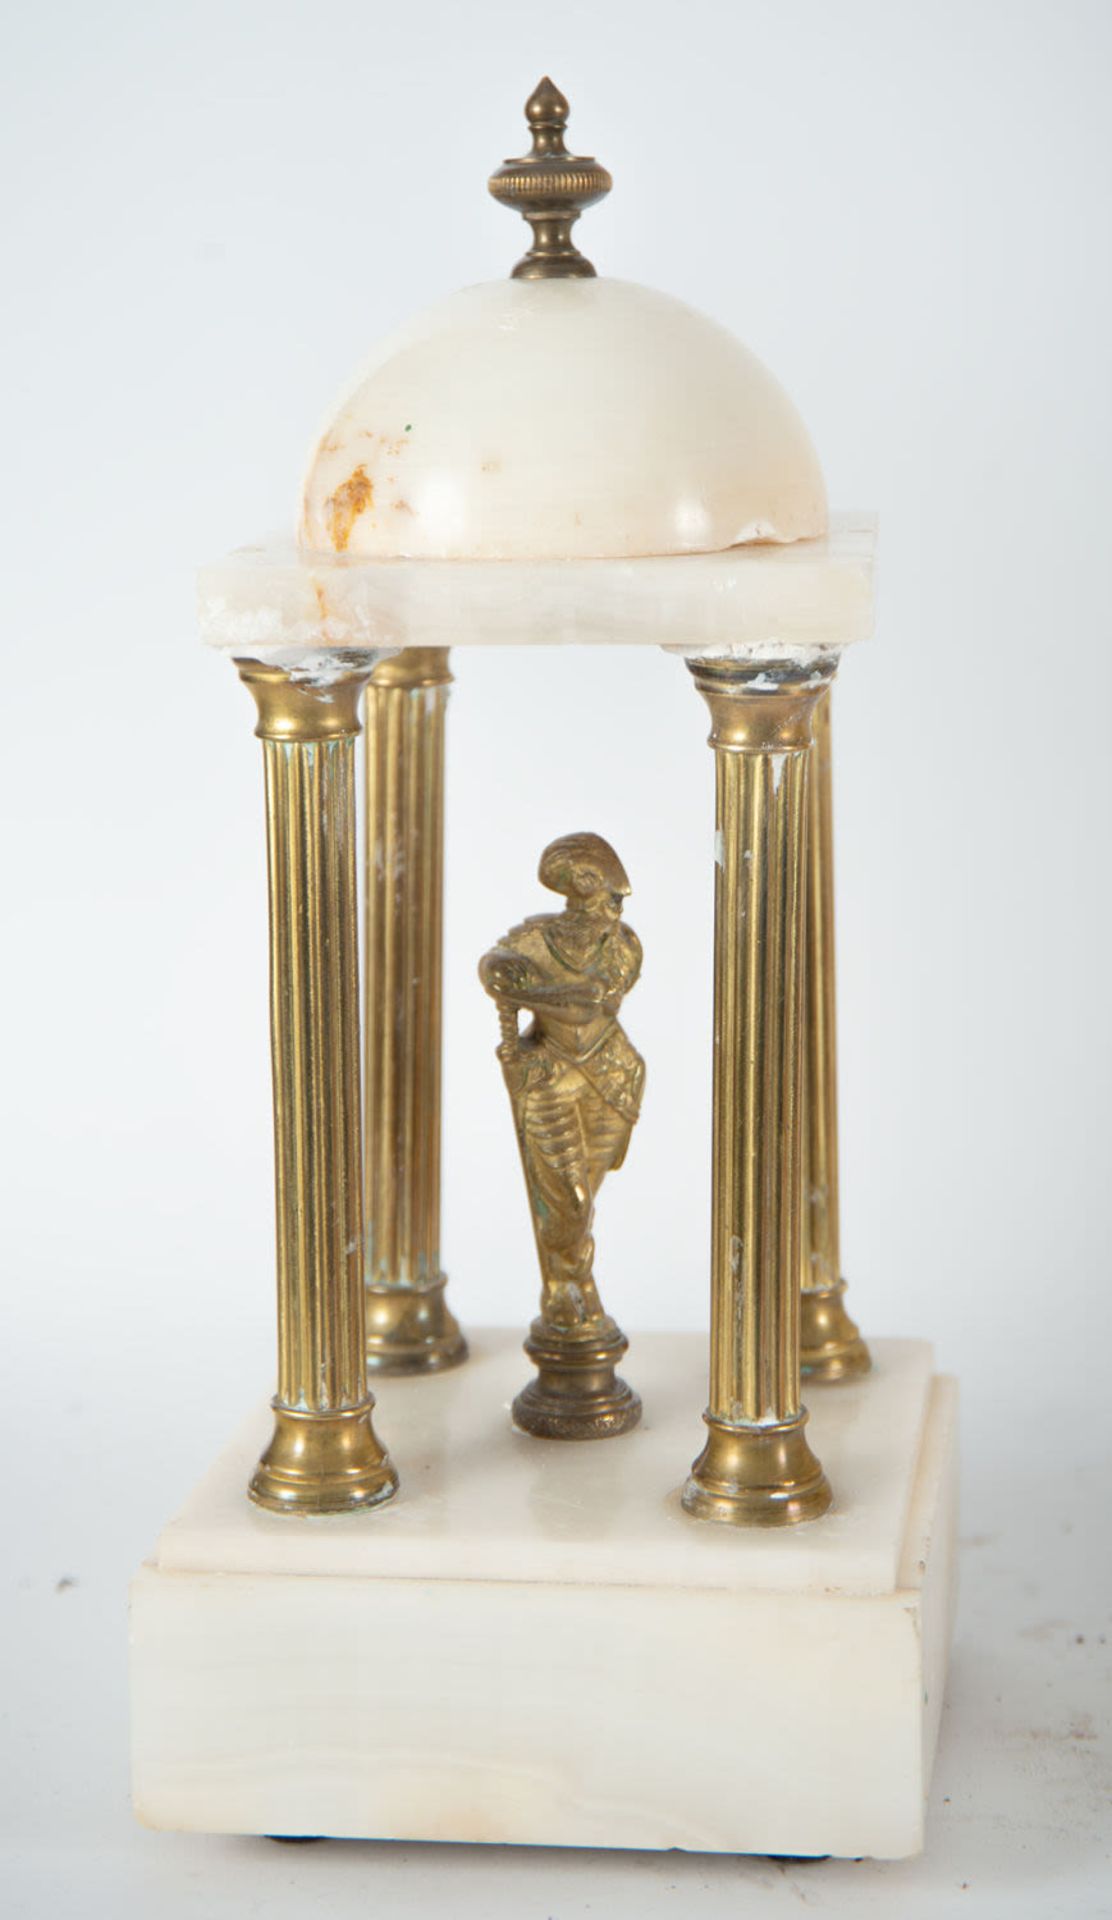 Alabaster garniture, circa 1890 - 1900, with a pair of temples and columns in gilt bronze - Image 5 of 7